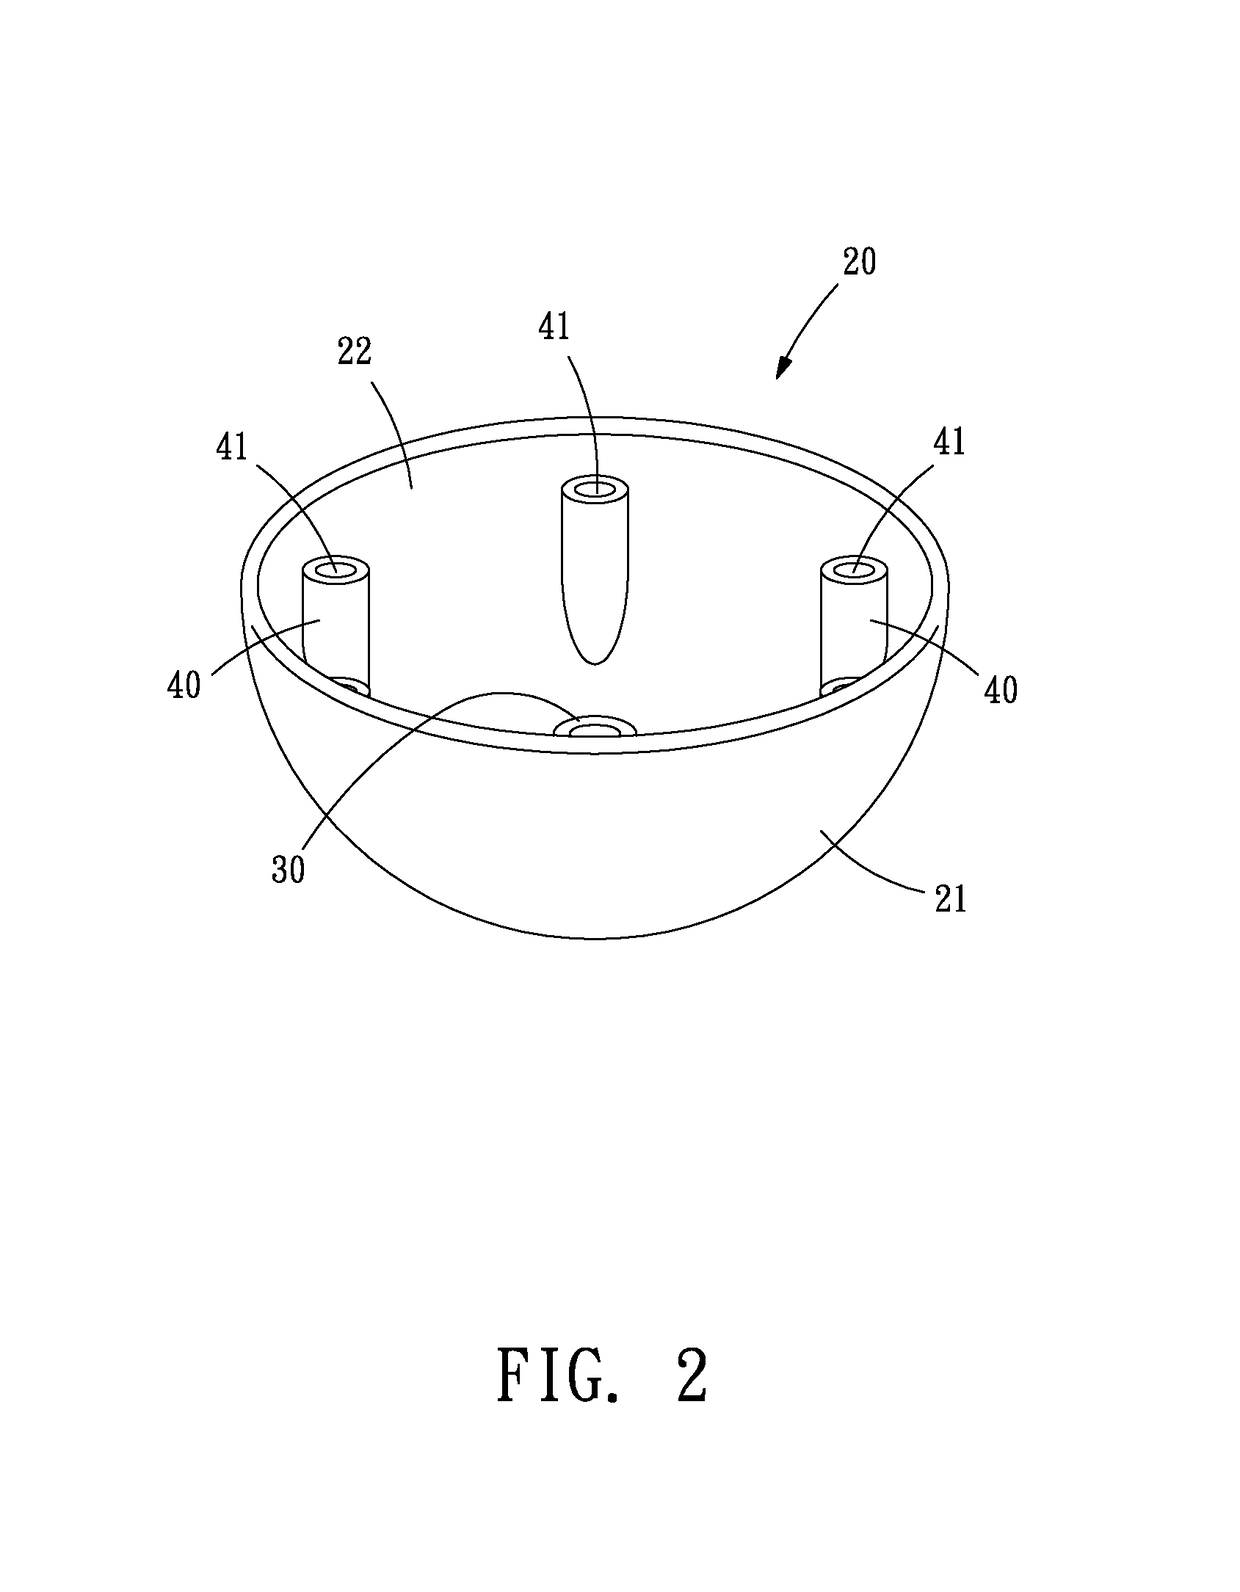 Device capable of enabling balloon to stand up